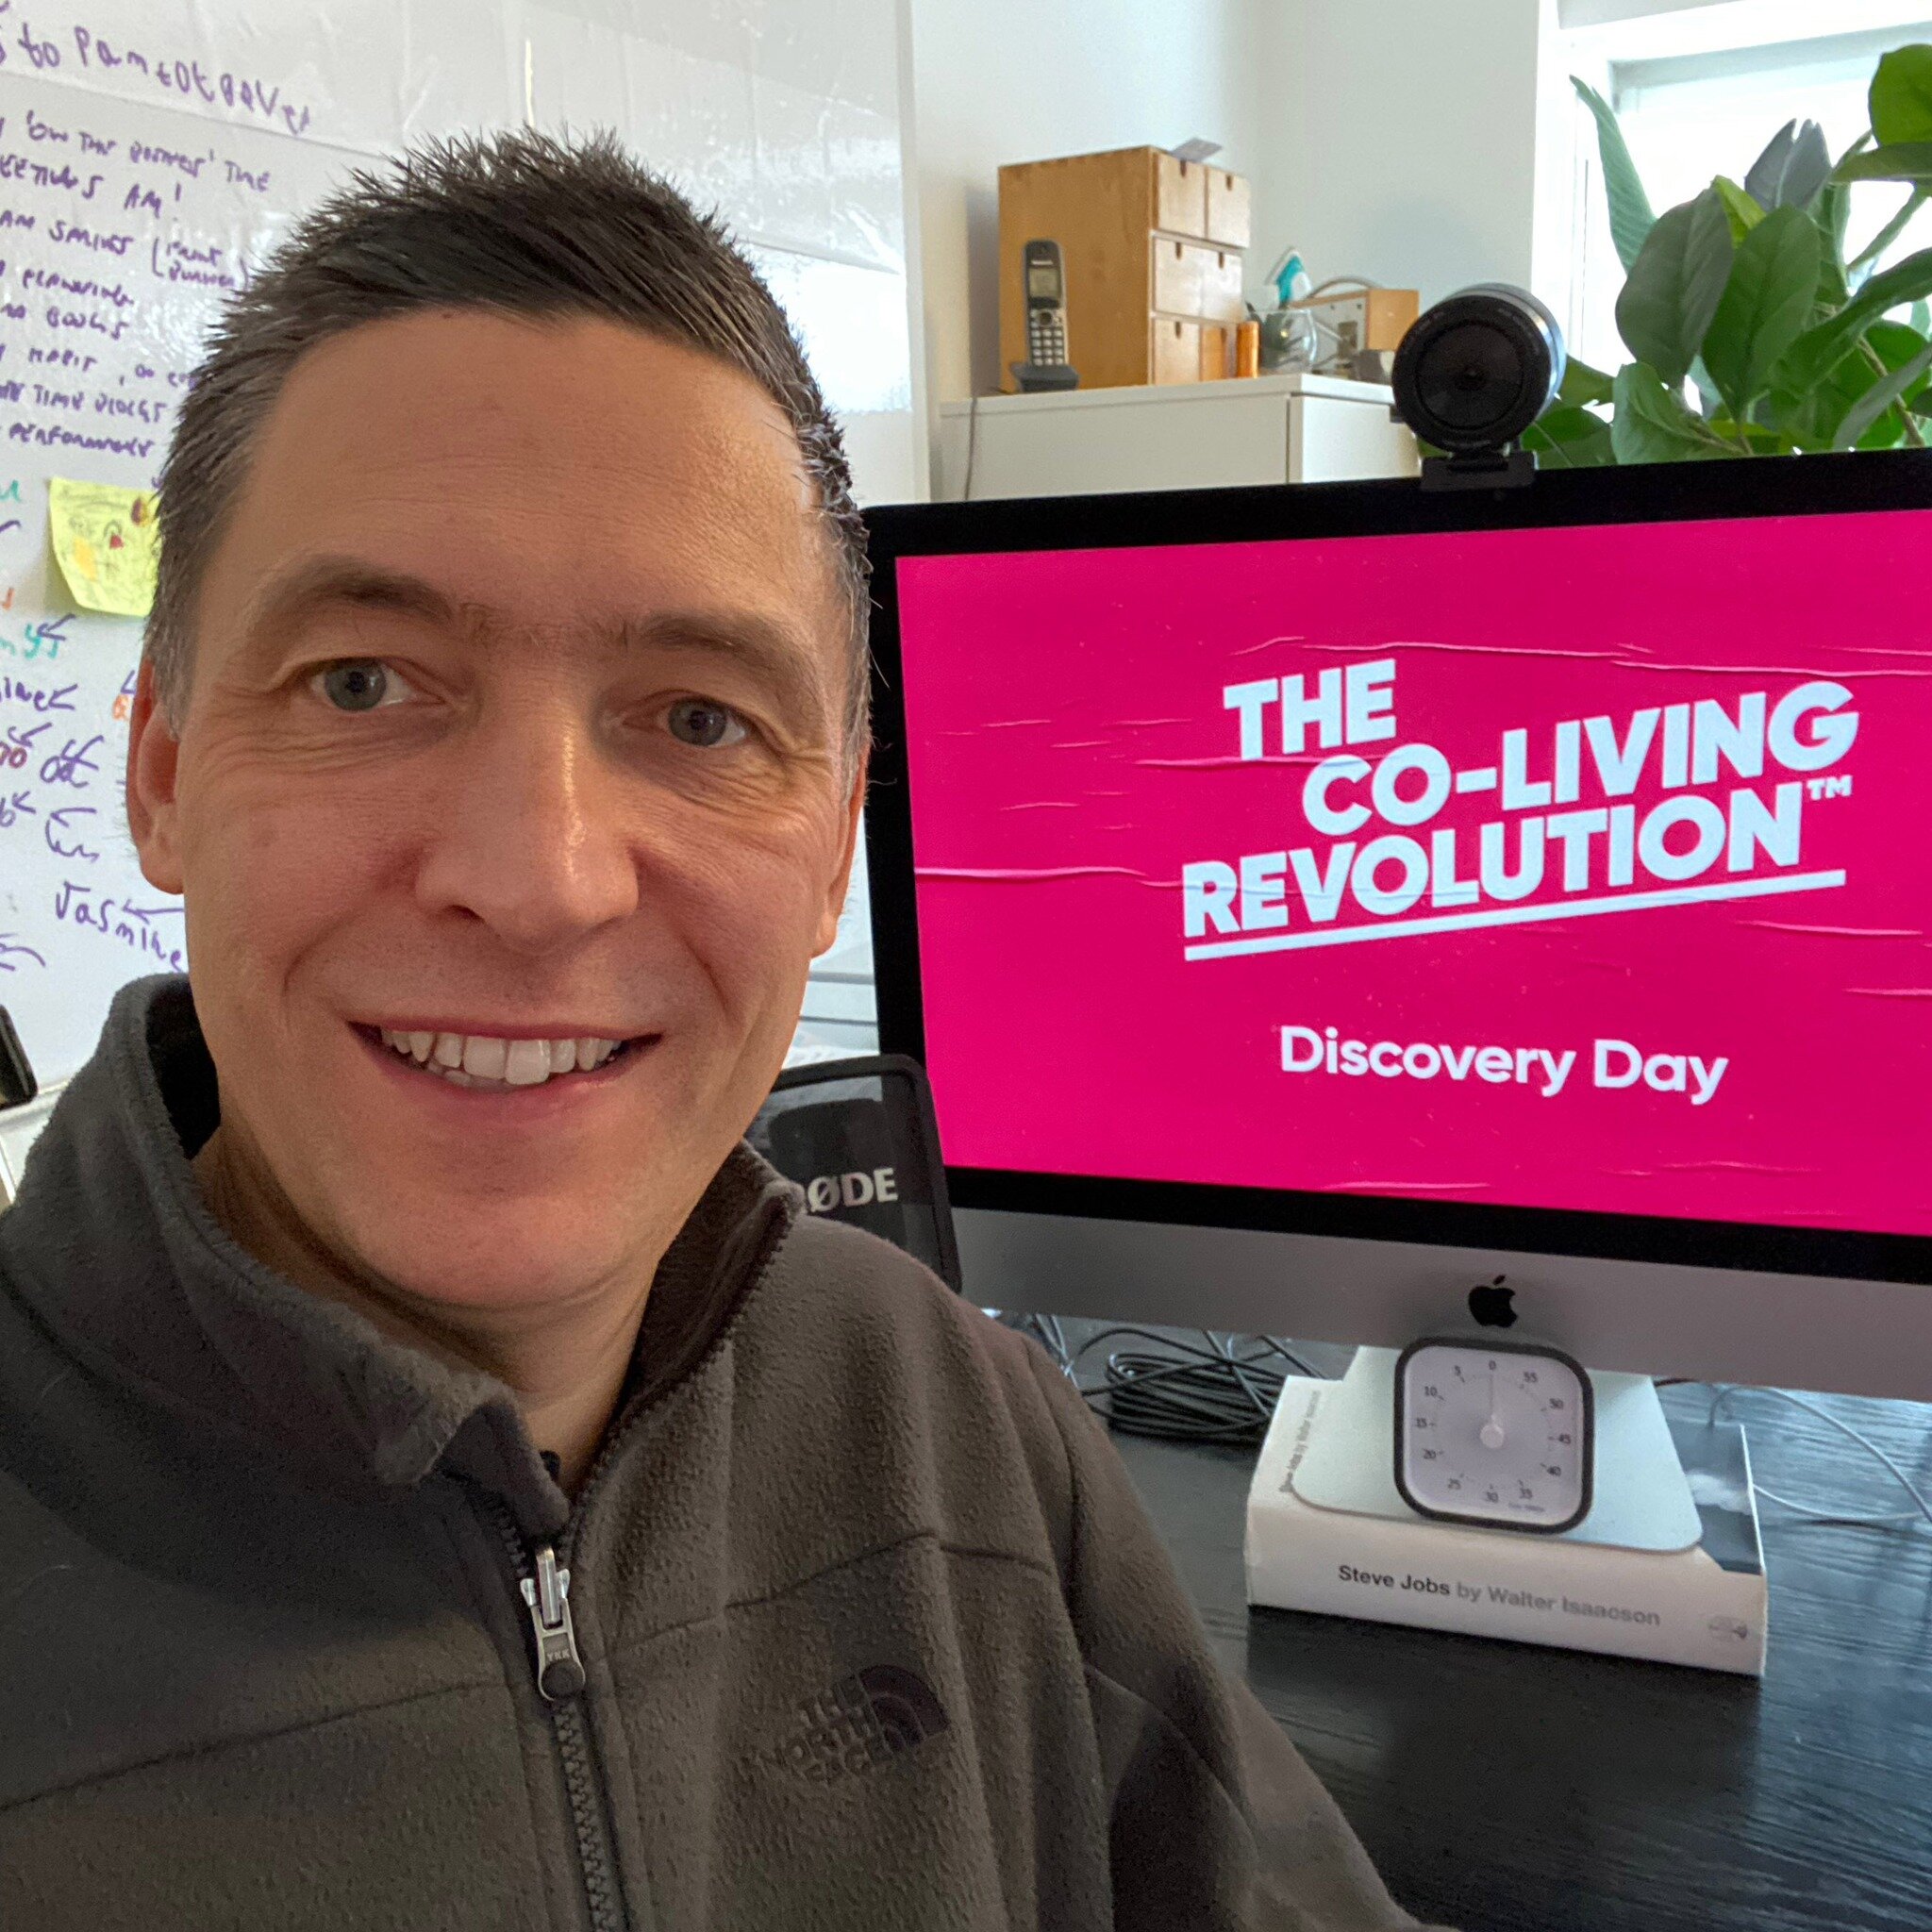 Fantastic turn out of over 60 attendees to our recent Co-Living HMO Discovery Day. Only 1 date left available !!!

If you missed out, come and join us on Sun 16th April for a full day of HMO training. 

https://www.theco-livingrevolution.co.uk/
.
.
.